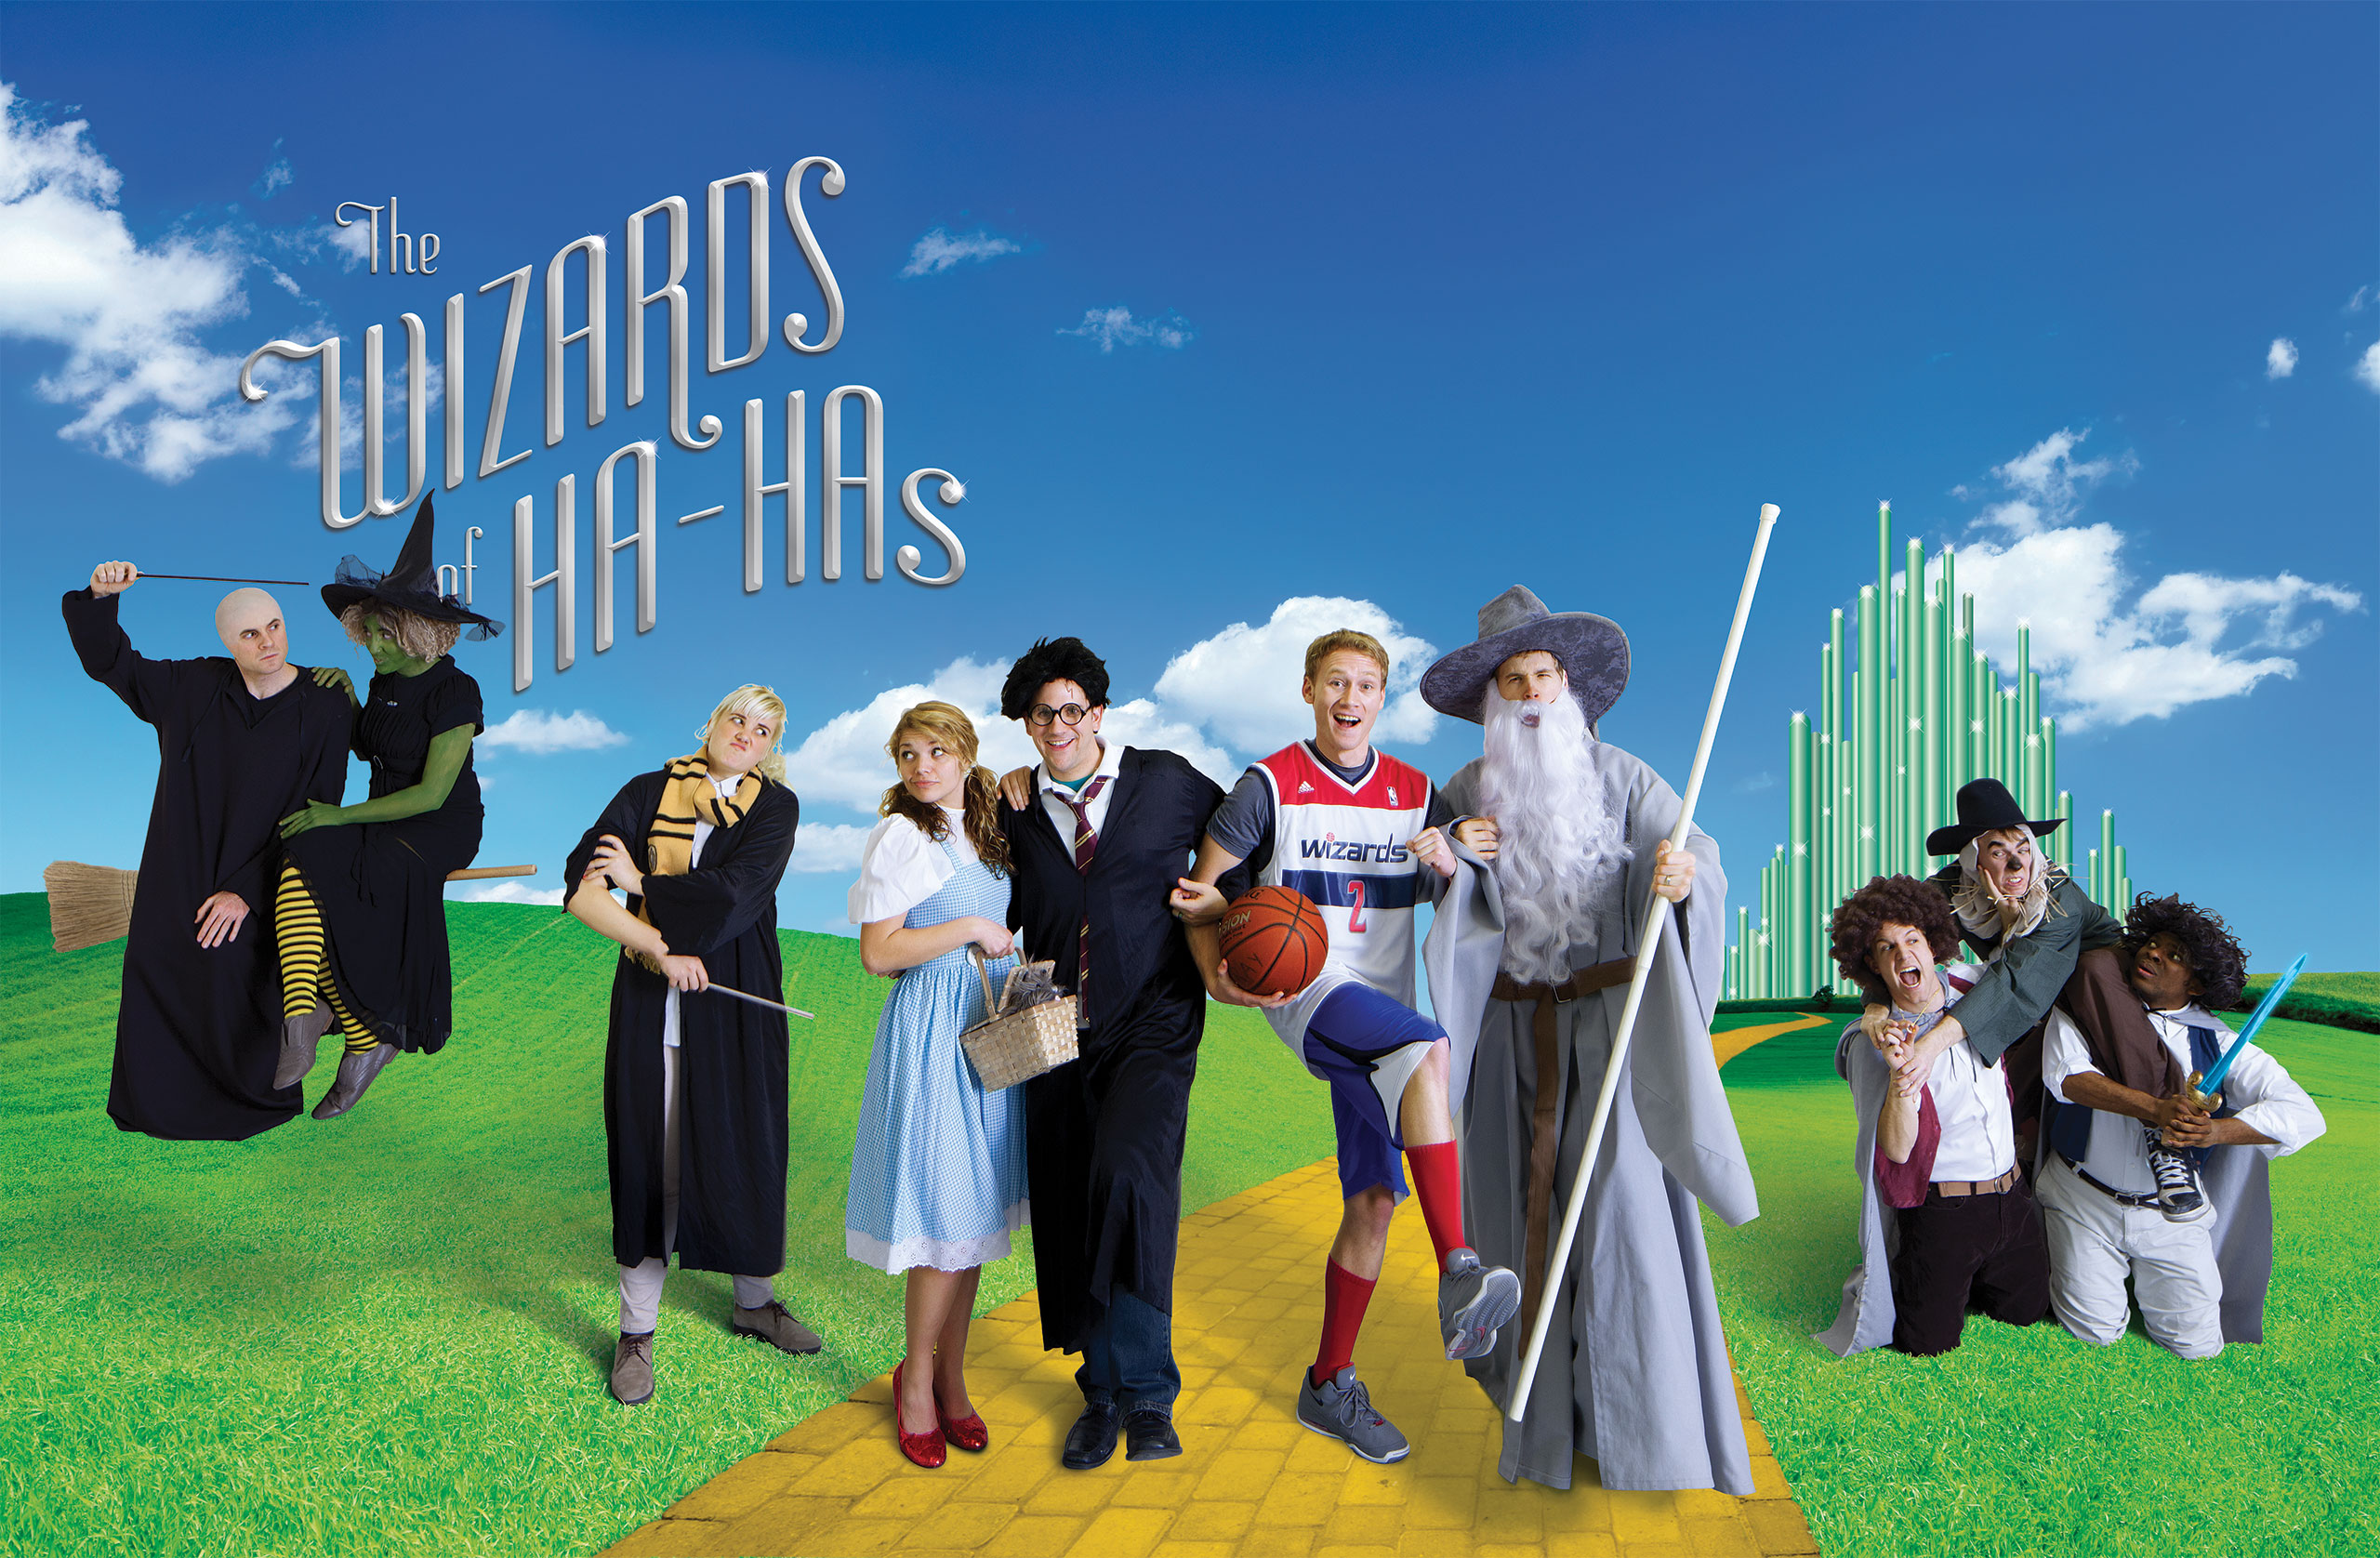 The stars of Divine Comedy appear in a fanciful landscape that nods to The Wizard of Oz or Harry Potter, complete with Voldemort, an Emerald City, brooms, and yellow brick road.